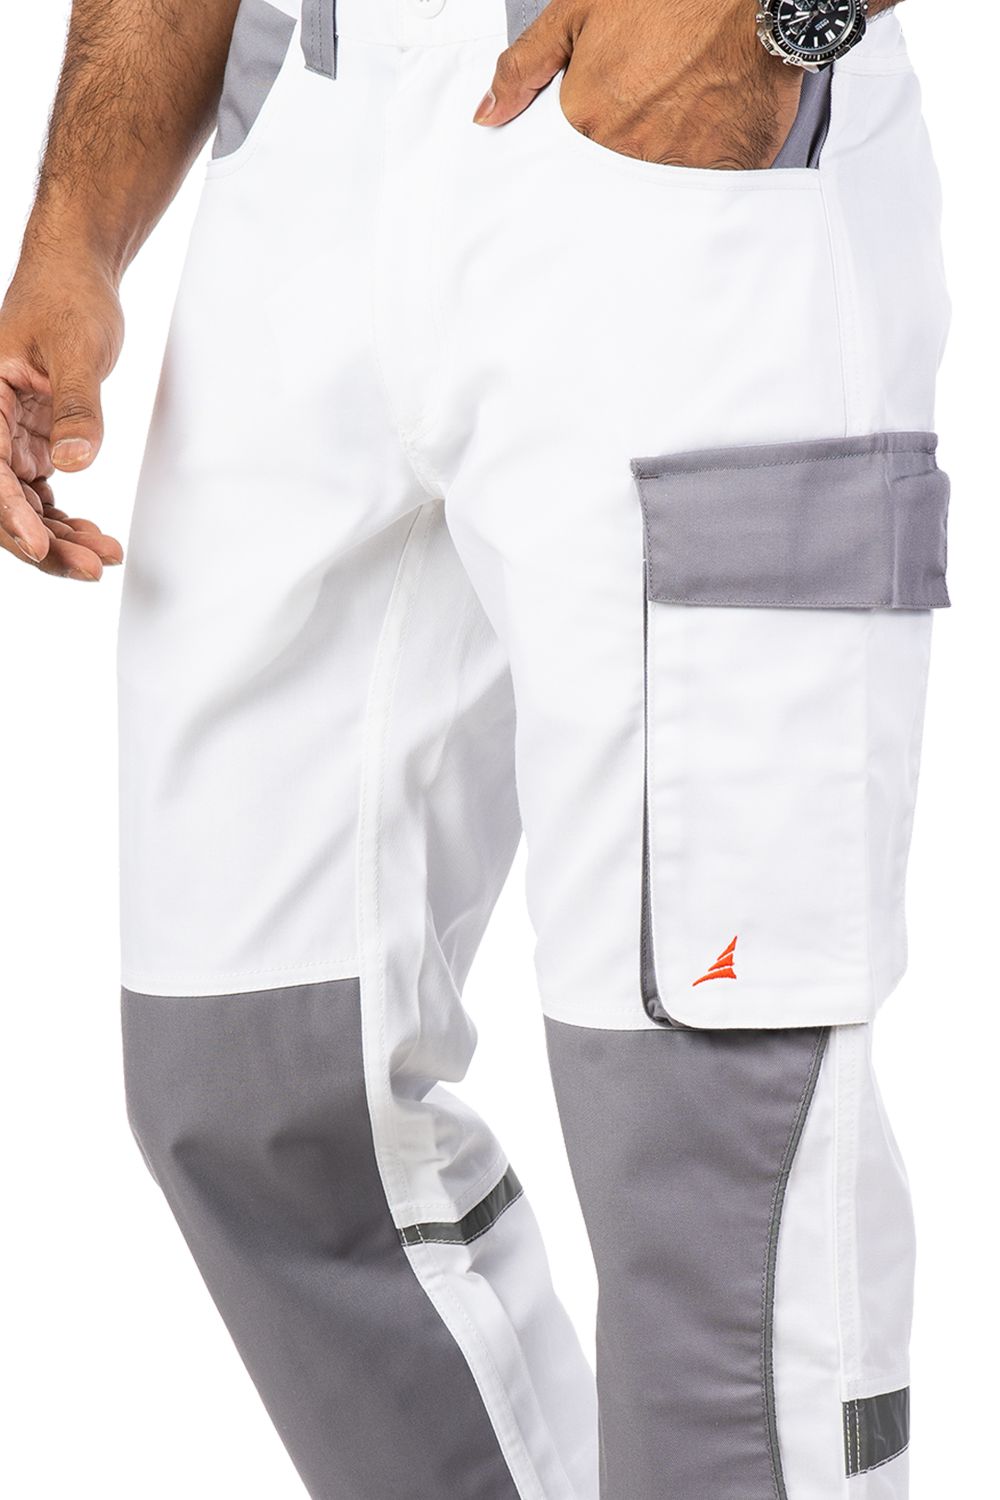 Cotton Blend Multiple pockets Secured Closures Elasticated White-Grey Trouser For Work